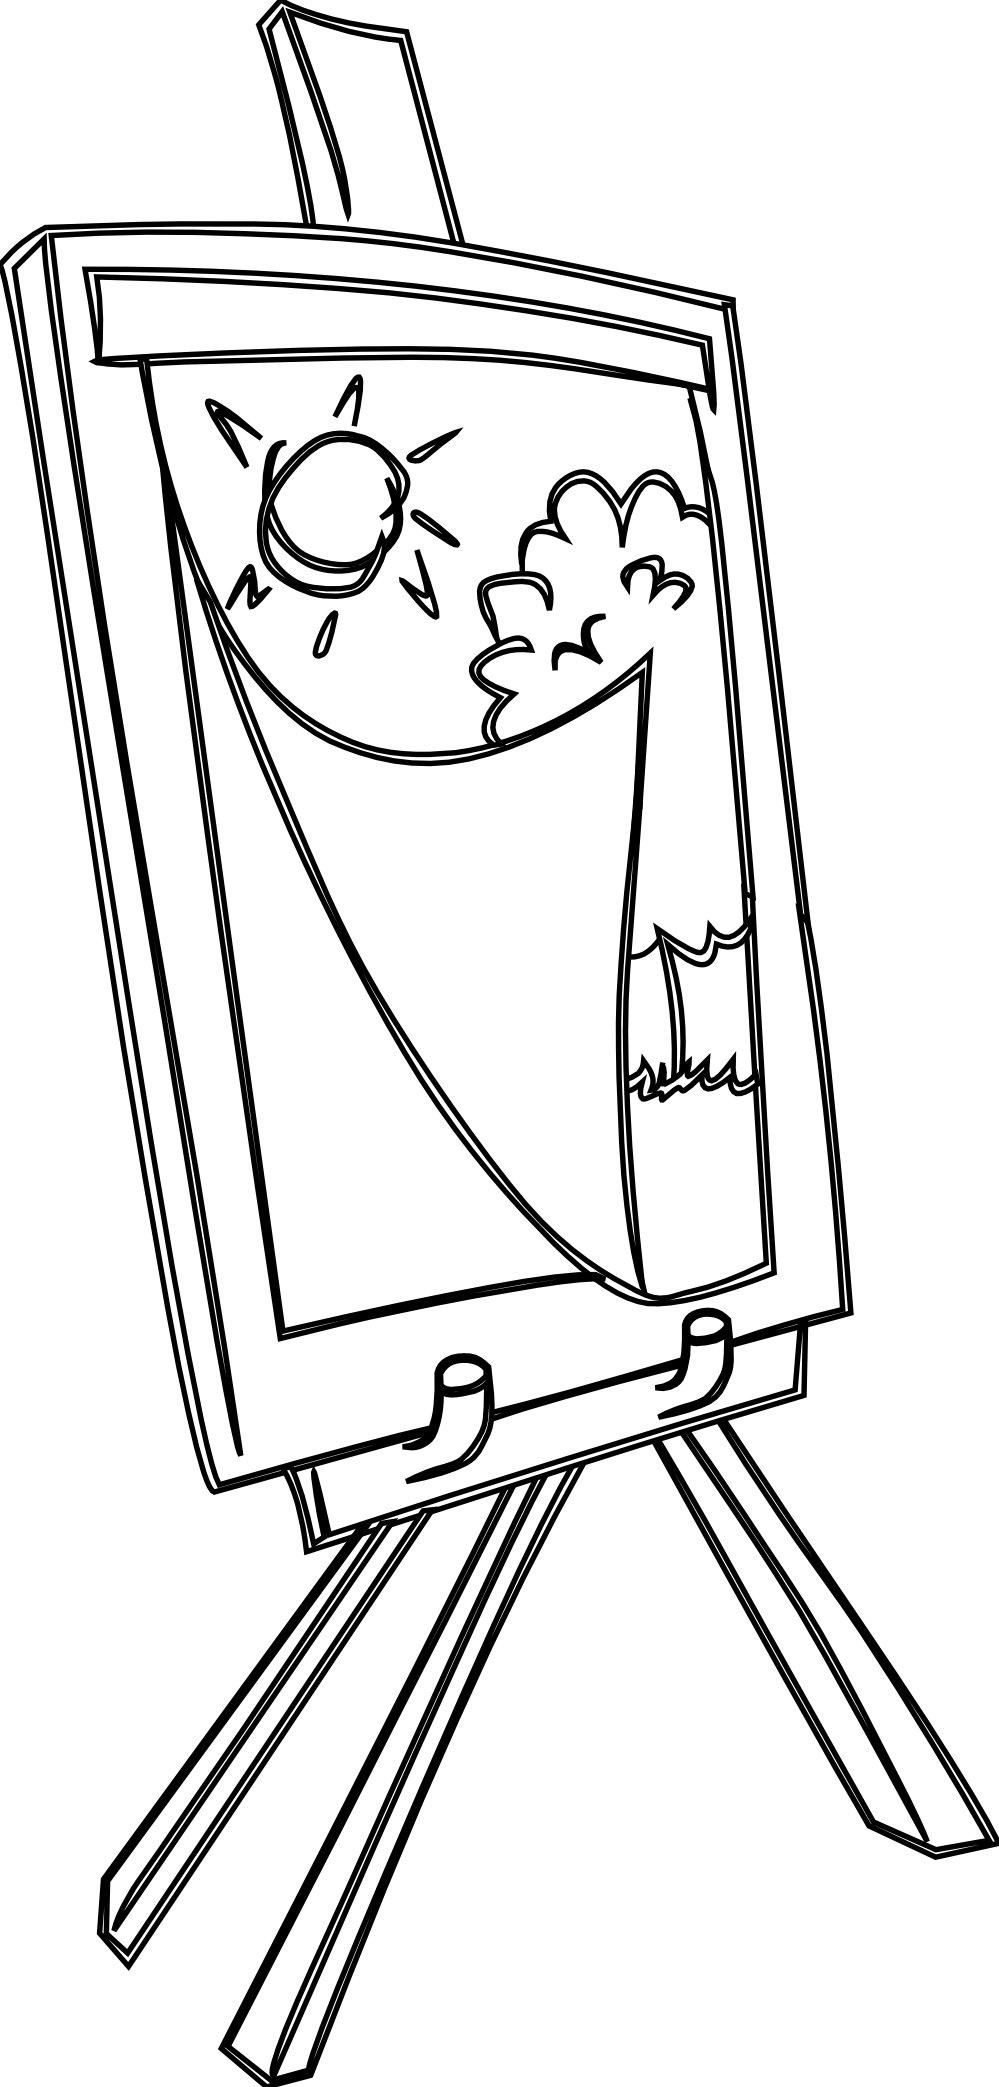 https://www.kindpng.com/picc/b/728-7280943_drawing-easels-white-easel-coloring-hd-png-download.png